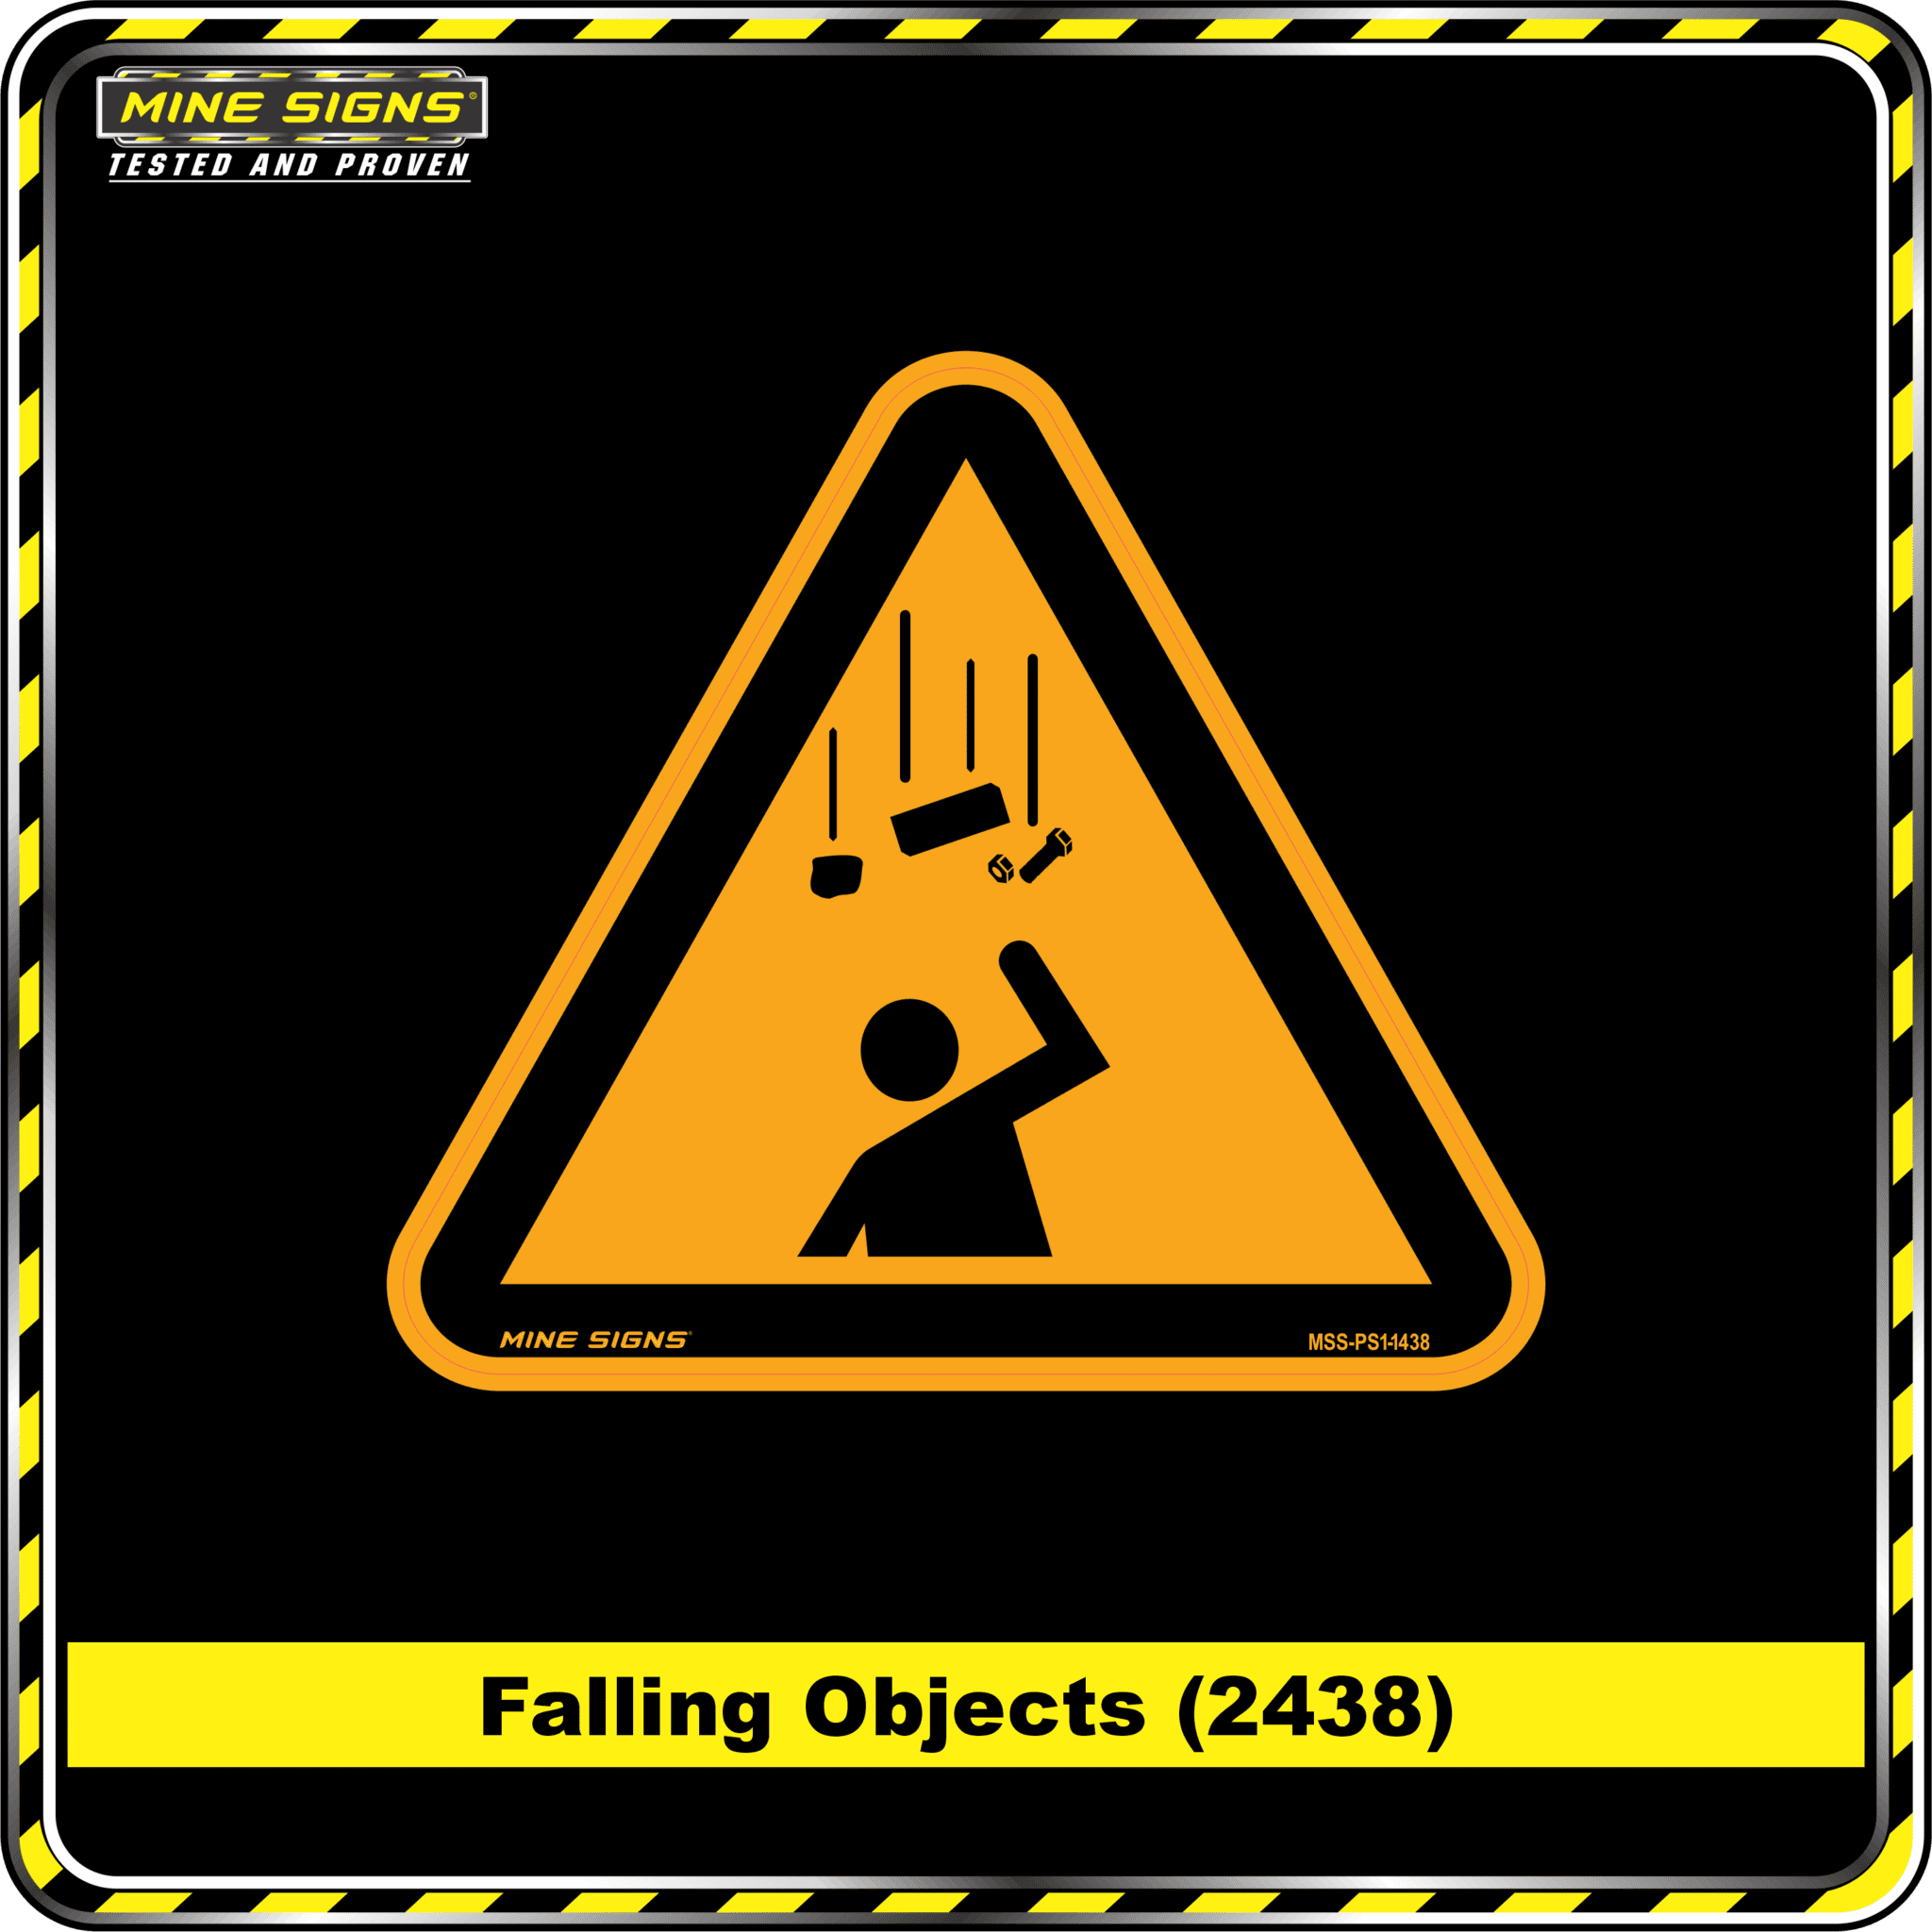 MS - Product Background - Falling Objects 2438